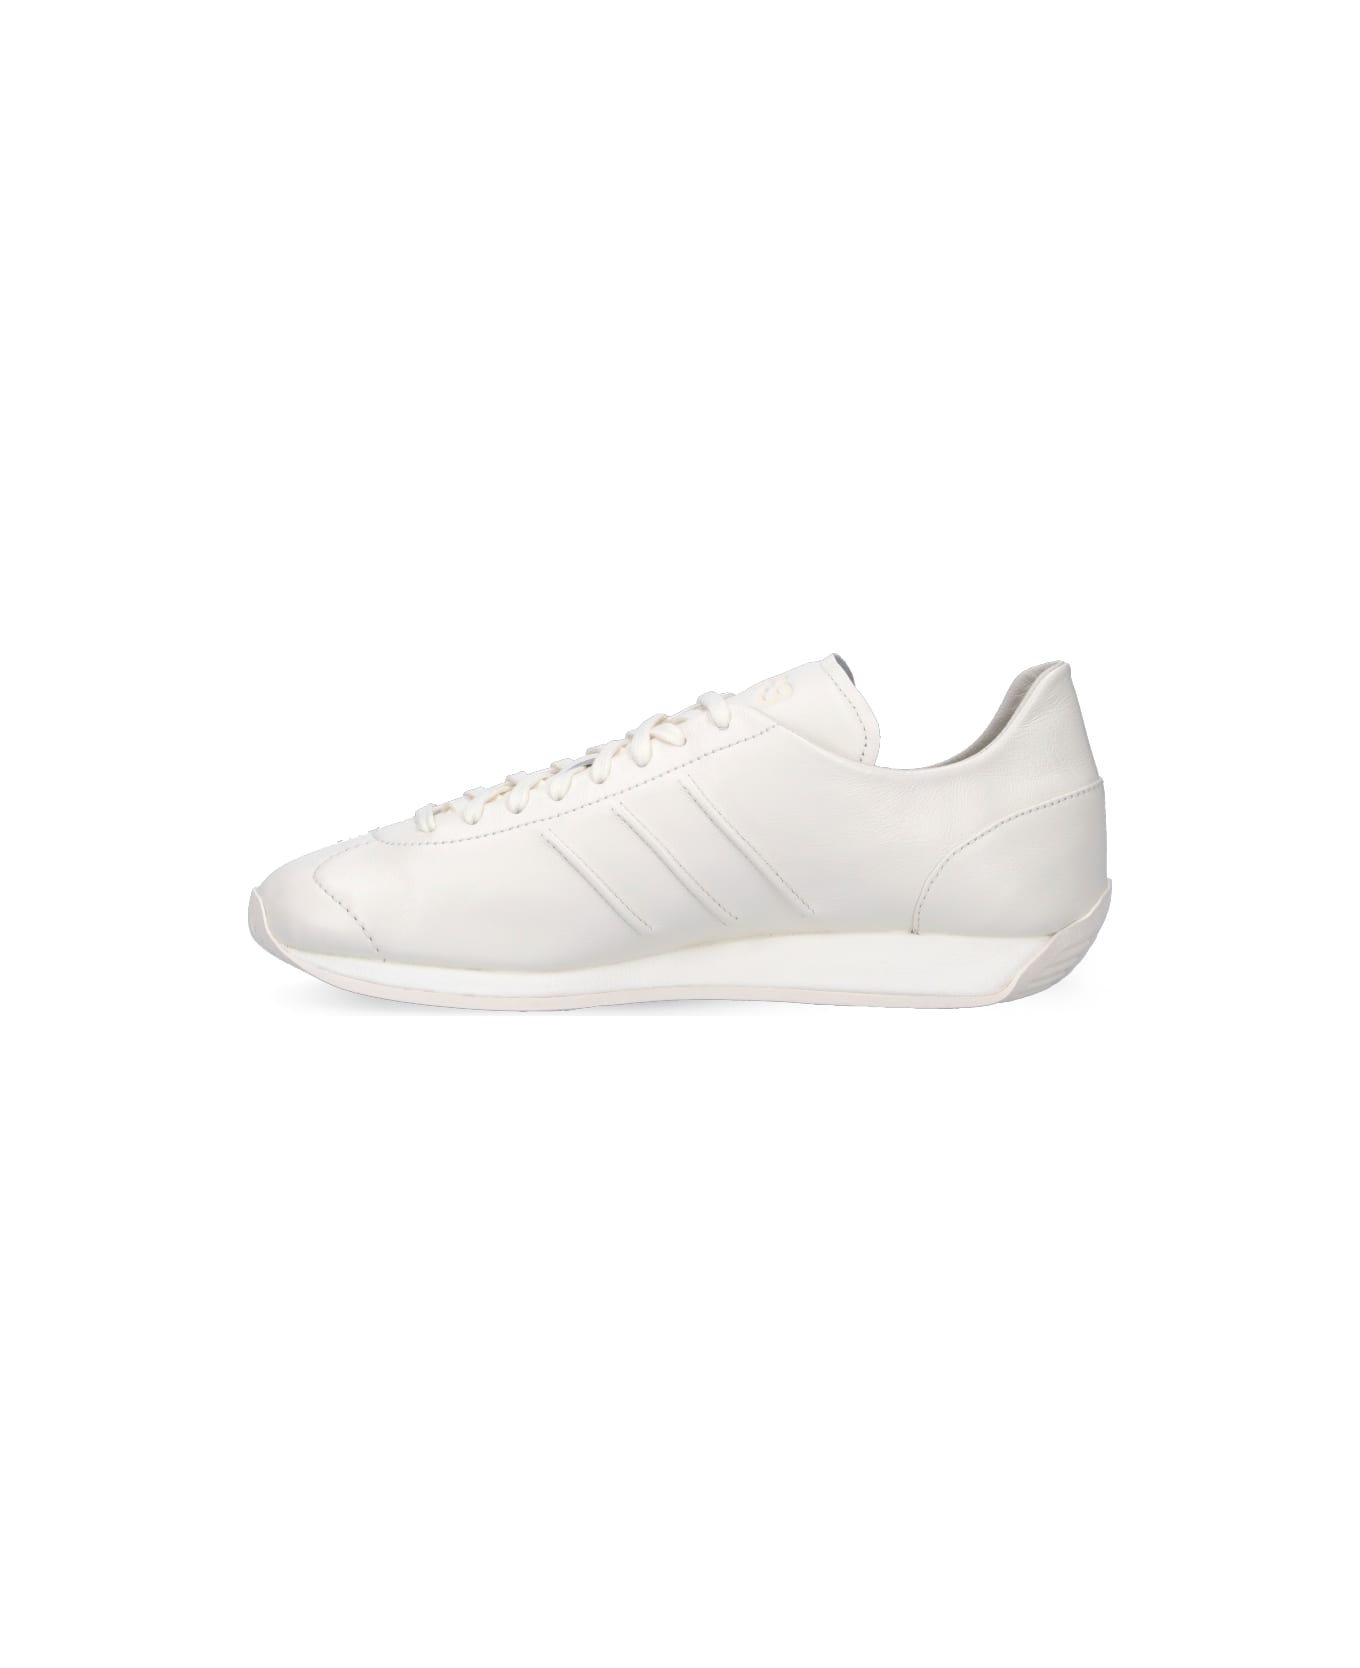 Y-3 "country" Sneakers - White